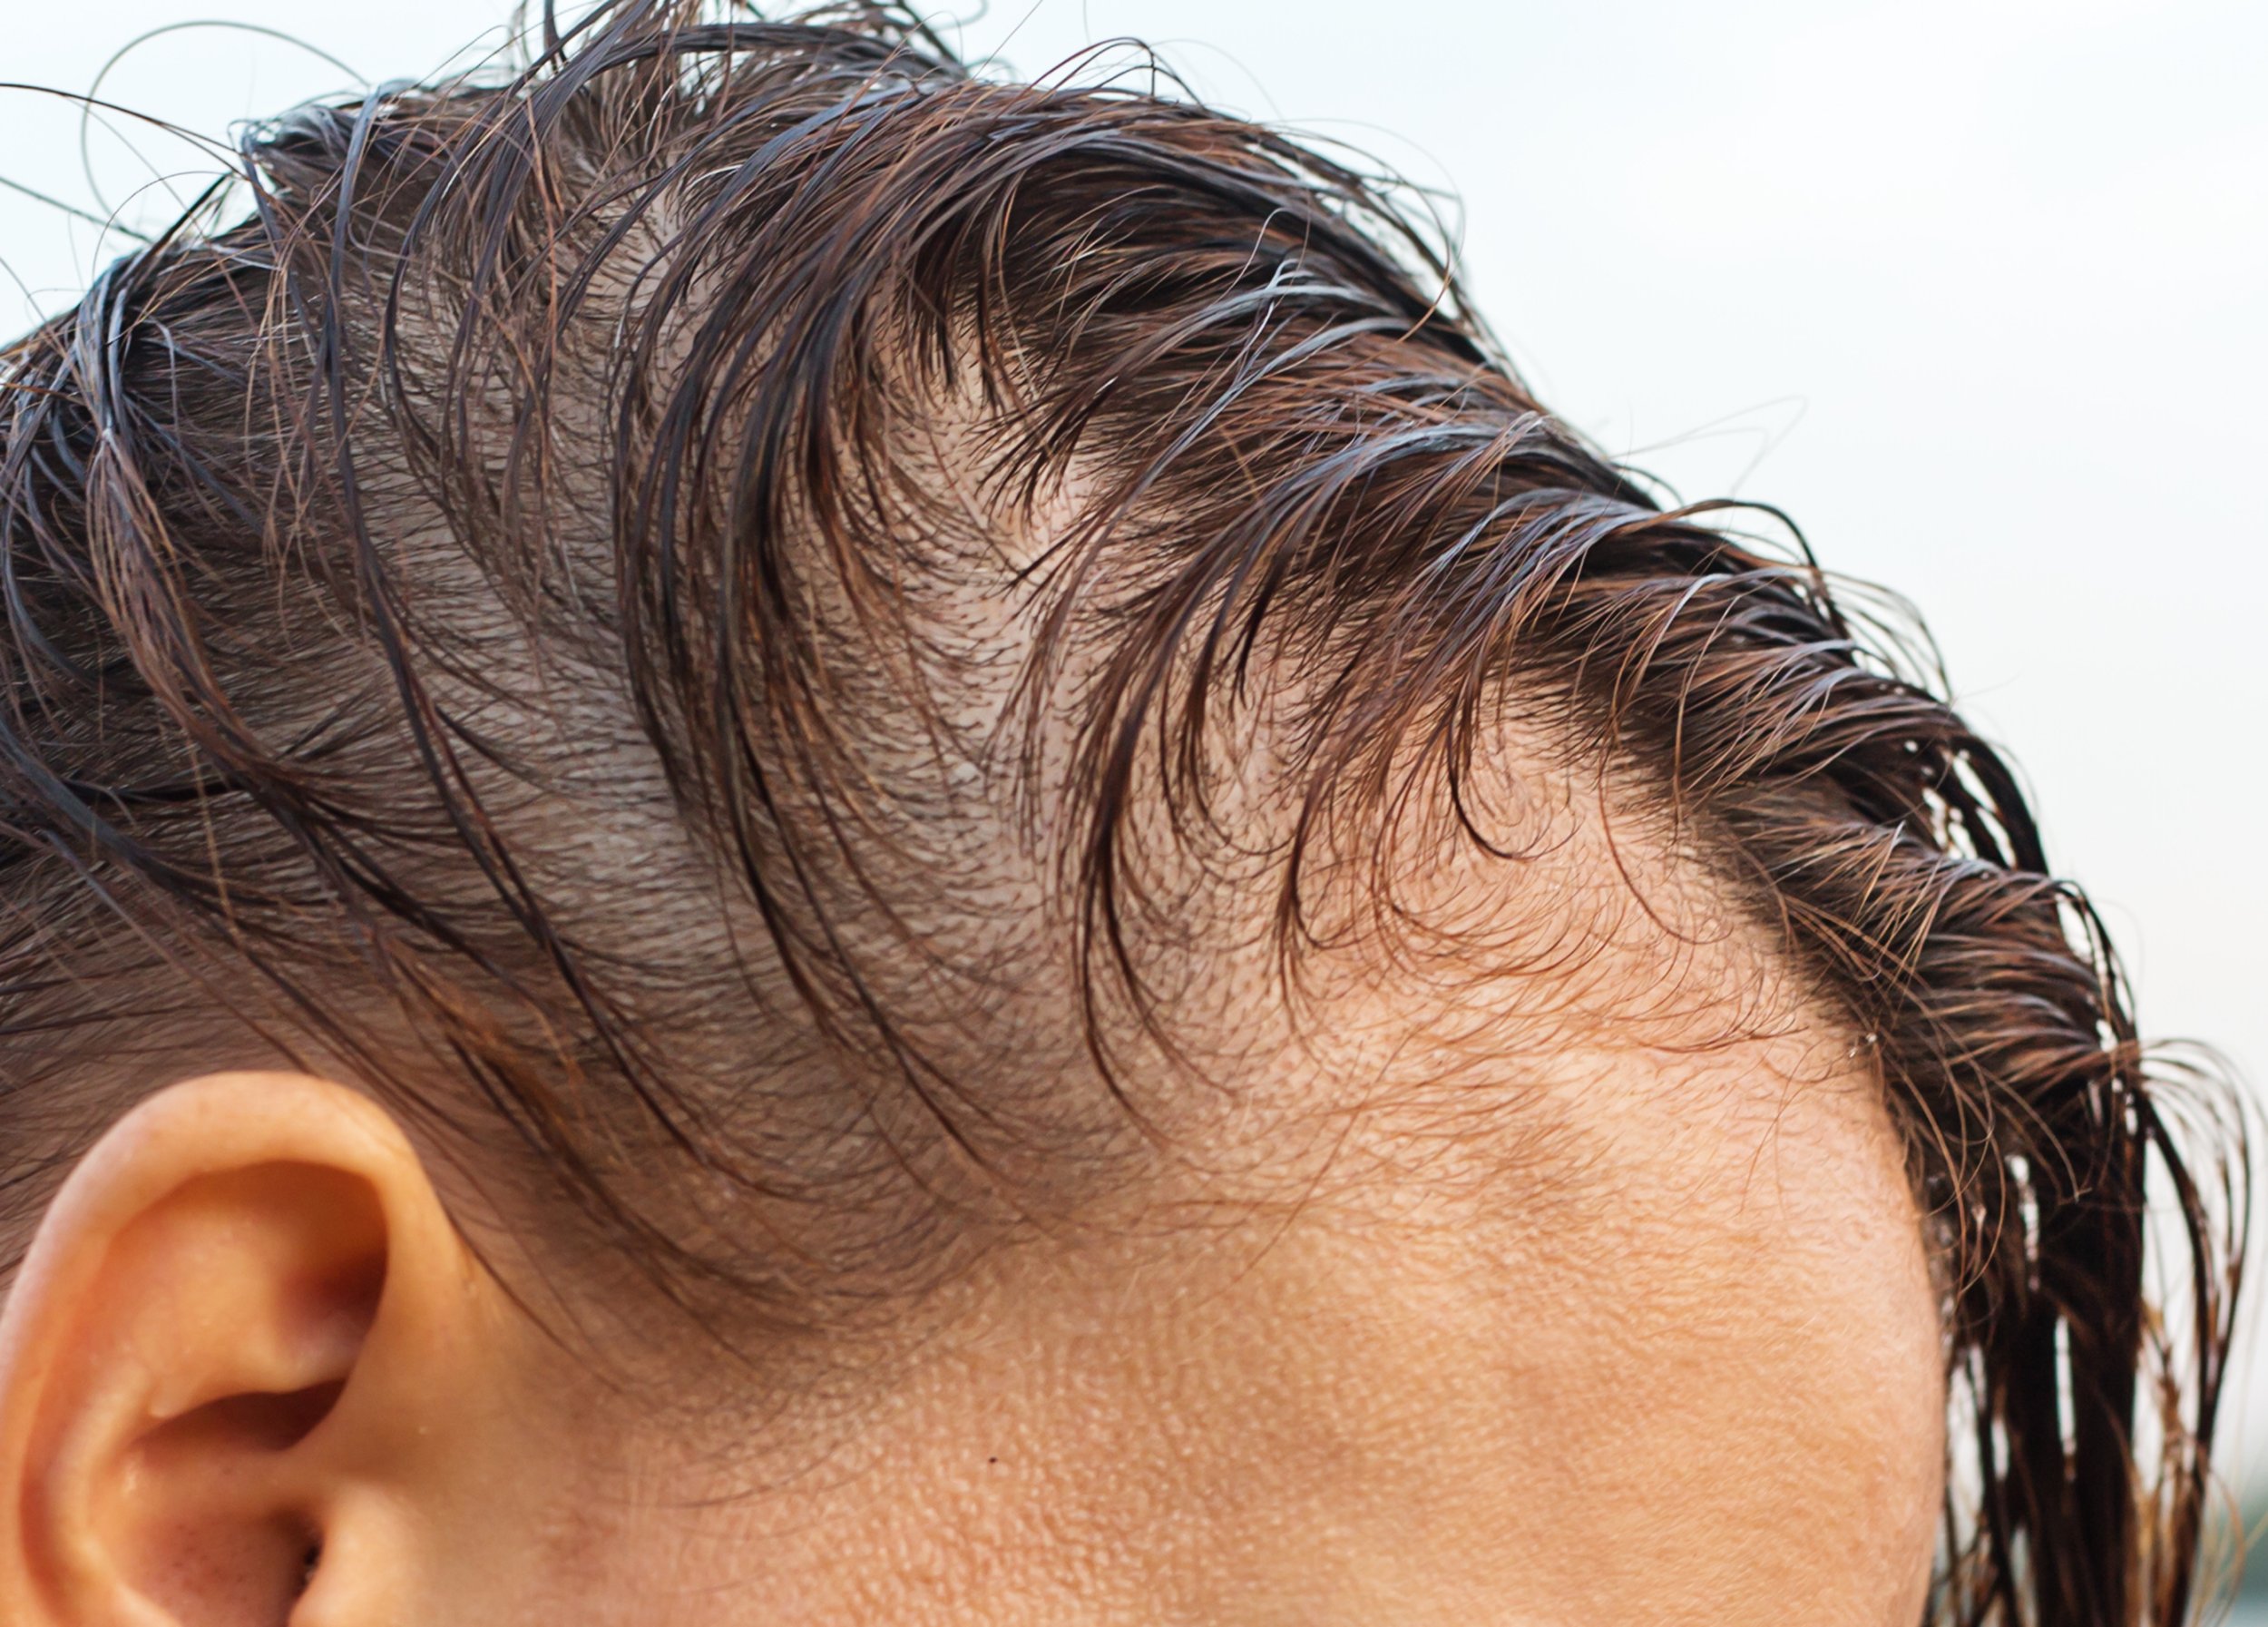 Hair Loss in Women is More Than a Cosmetic Concern  Dermatology Advisor